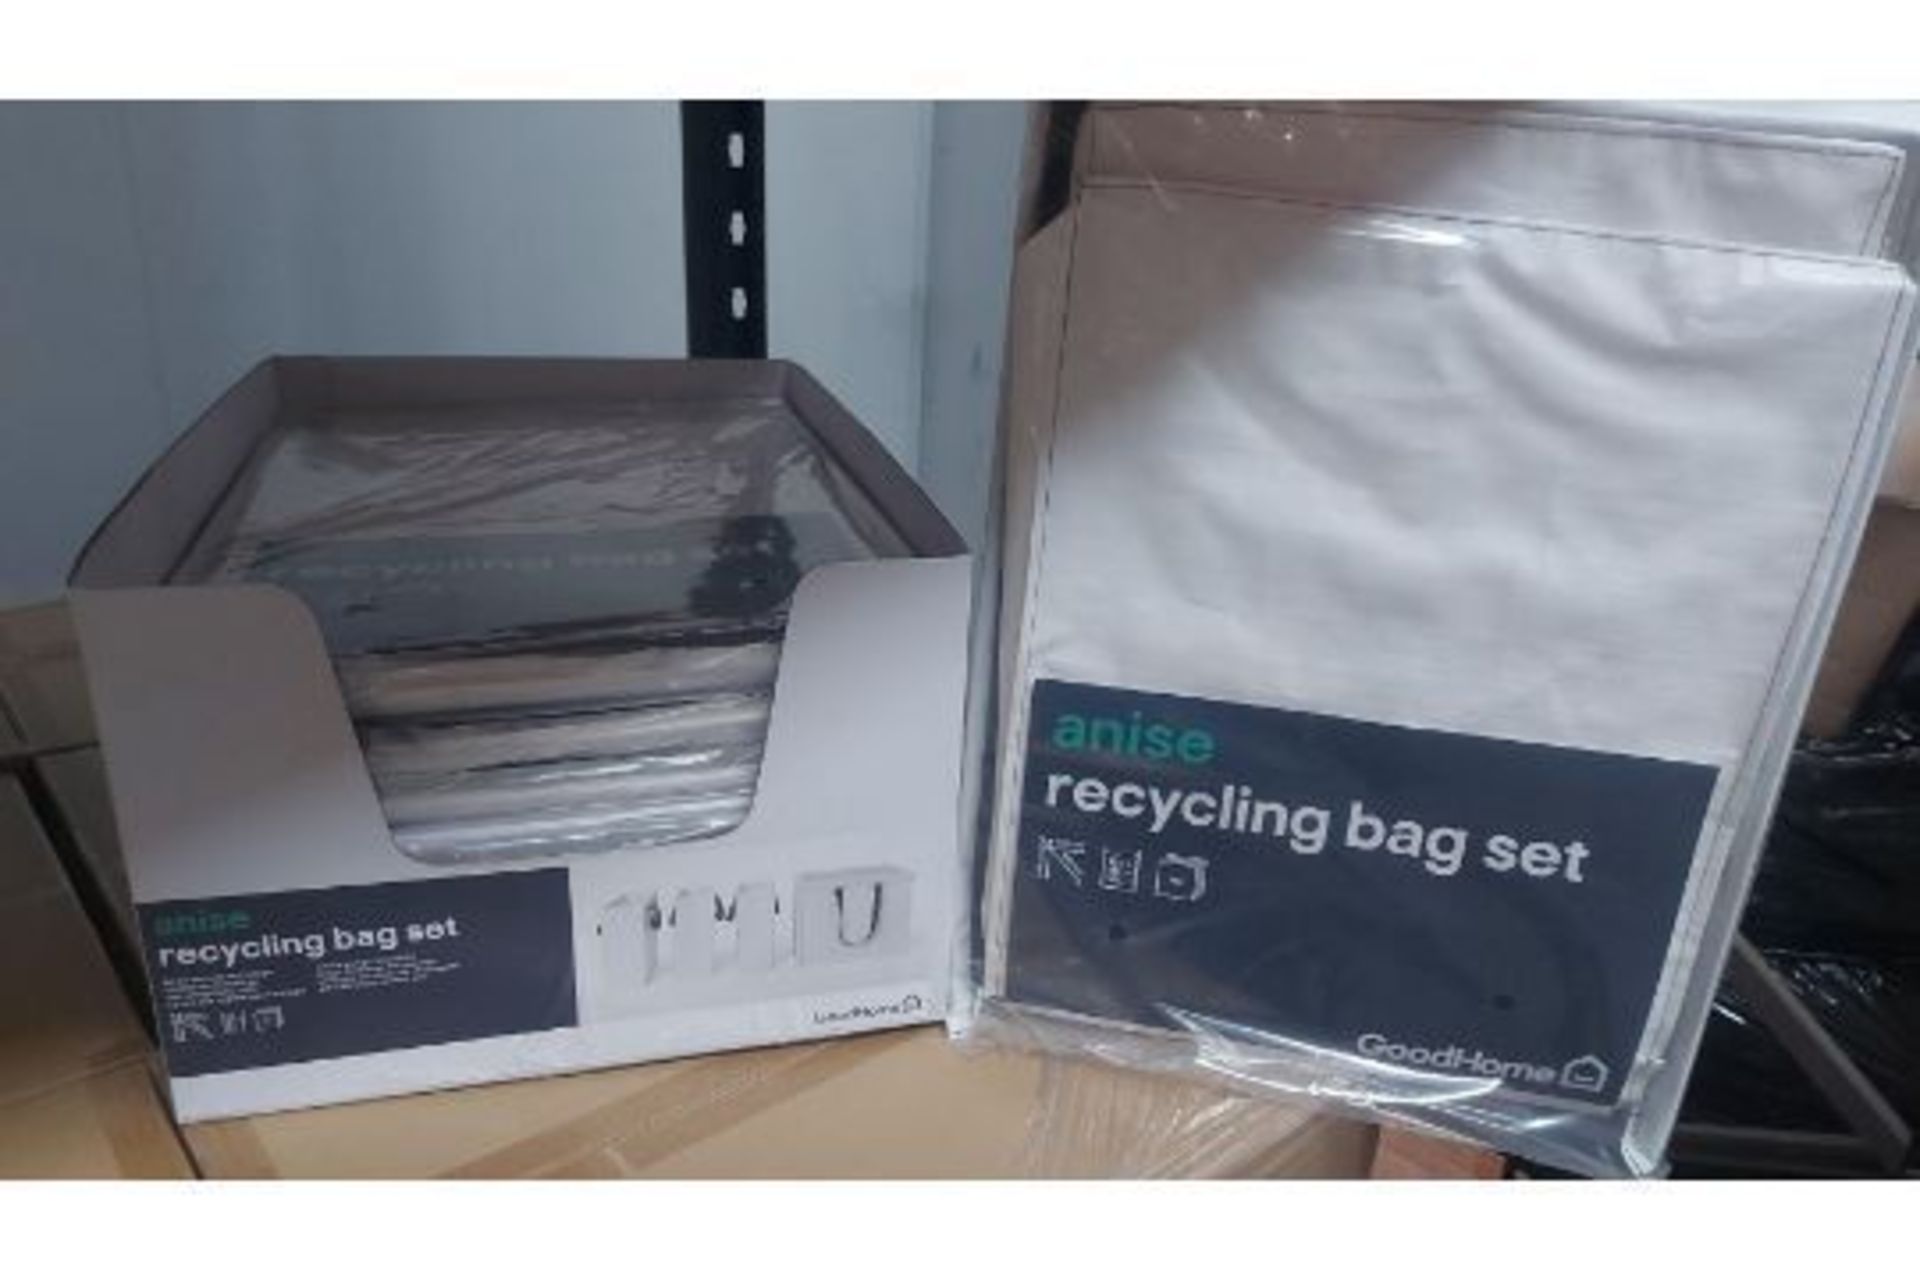 60 X NEW PACKAGED SETS OF 4 NISE RECYCLING/GARDEN BAG SETS. INCLUDES 3 X 18L HEAVY DUTY BAGS AND